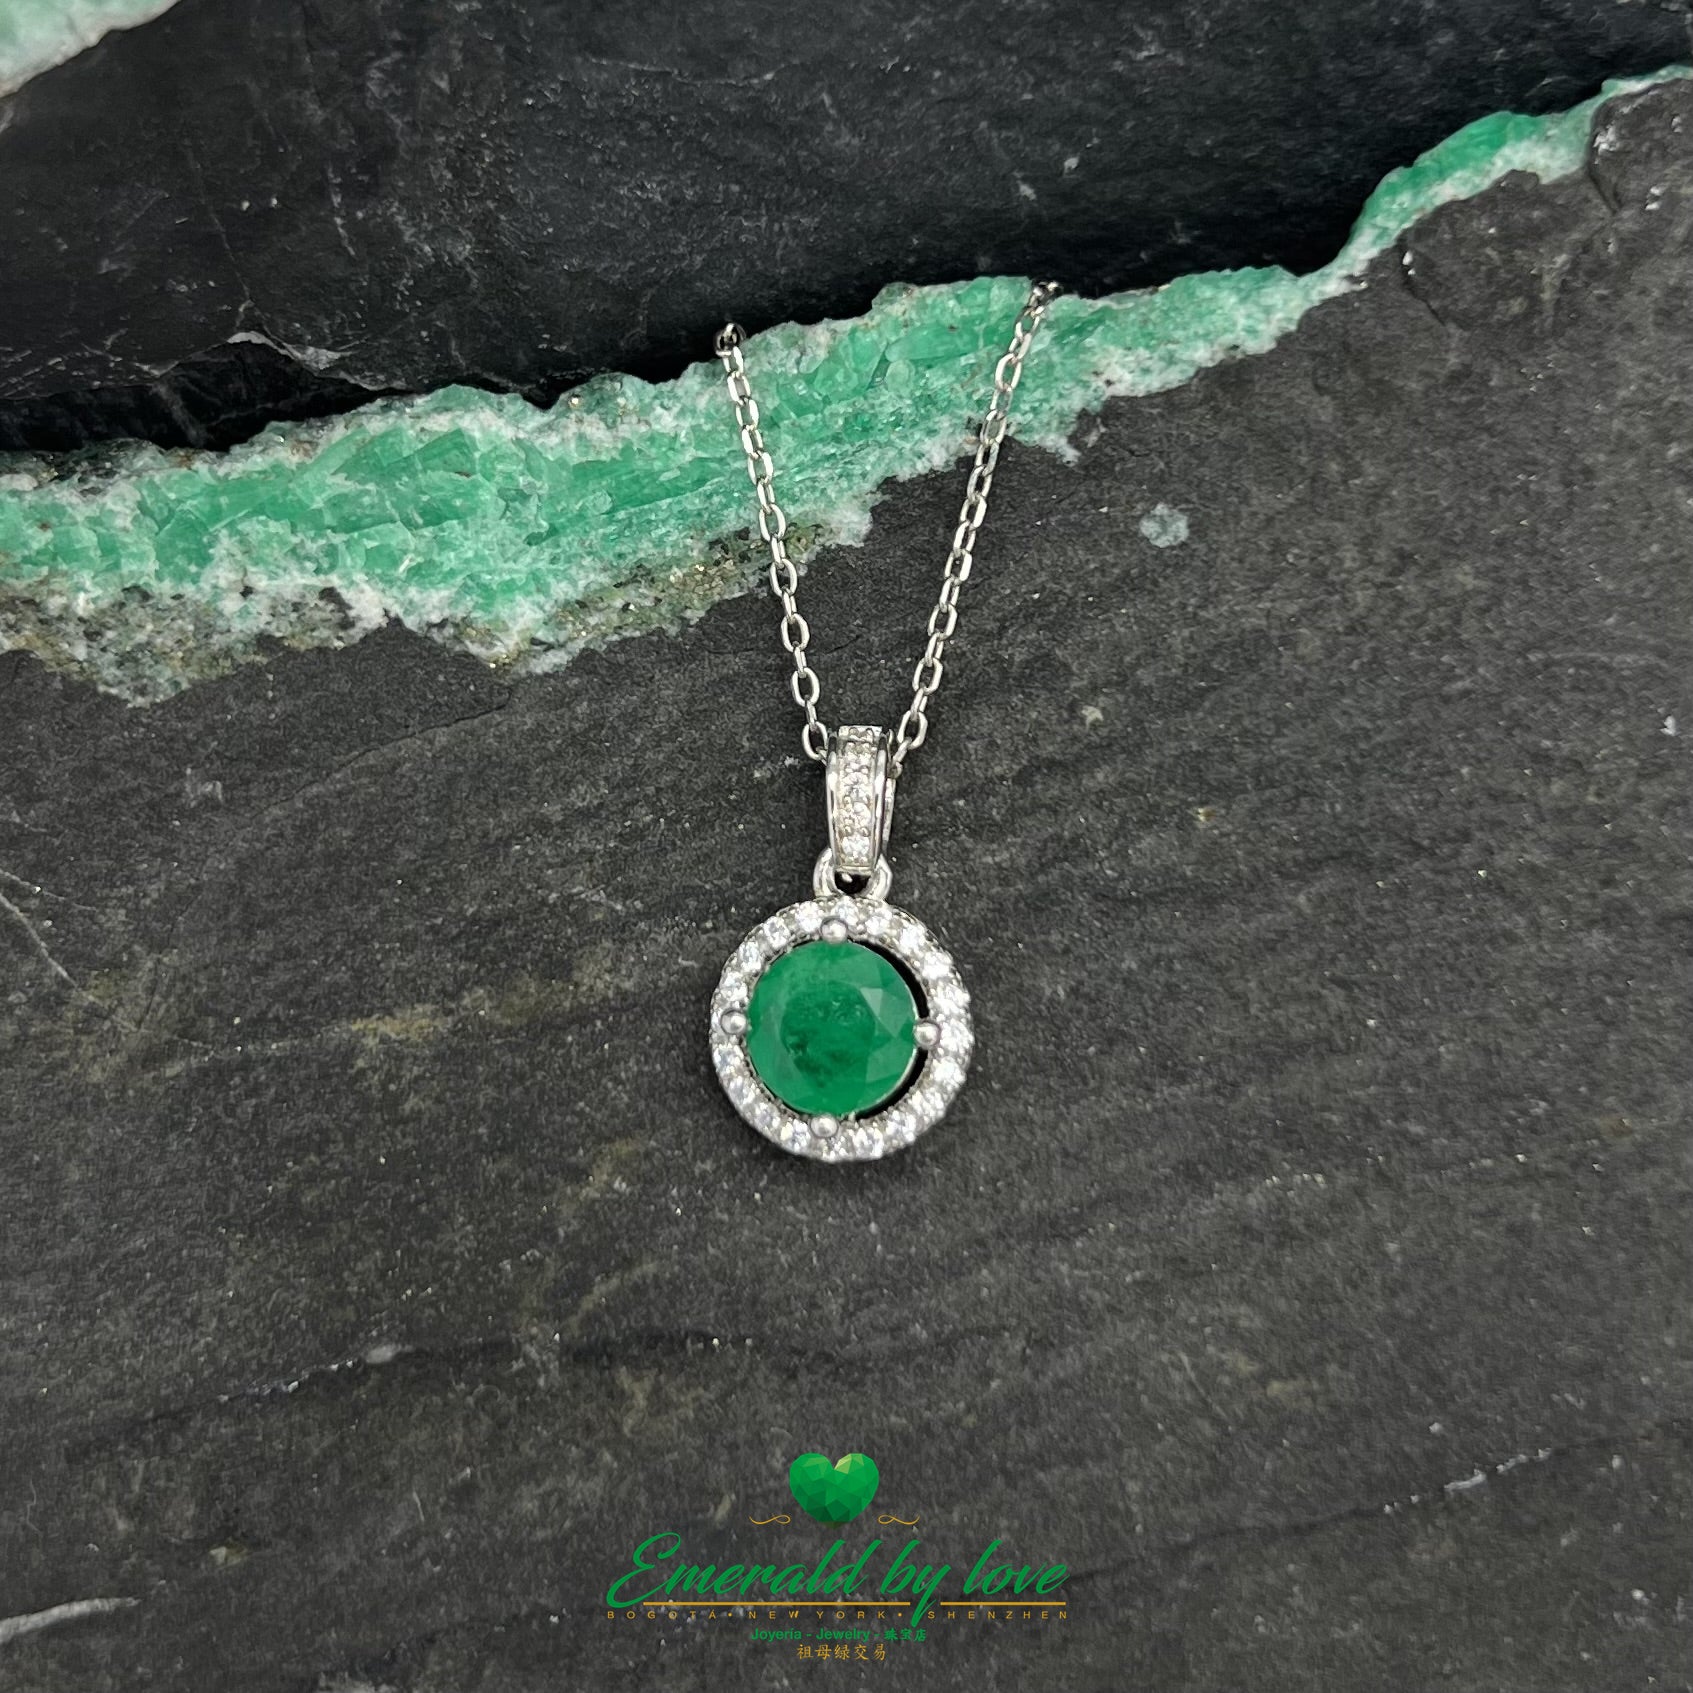 Simple Round Emerald Pendant with Halo of Cubic Zirconia